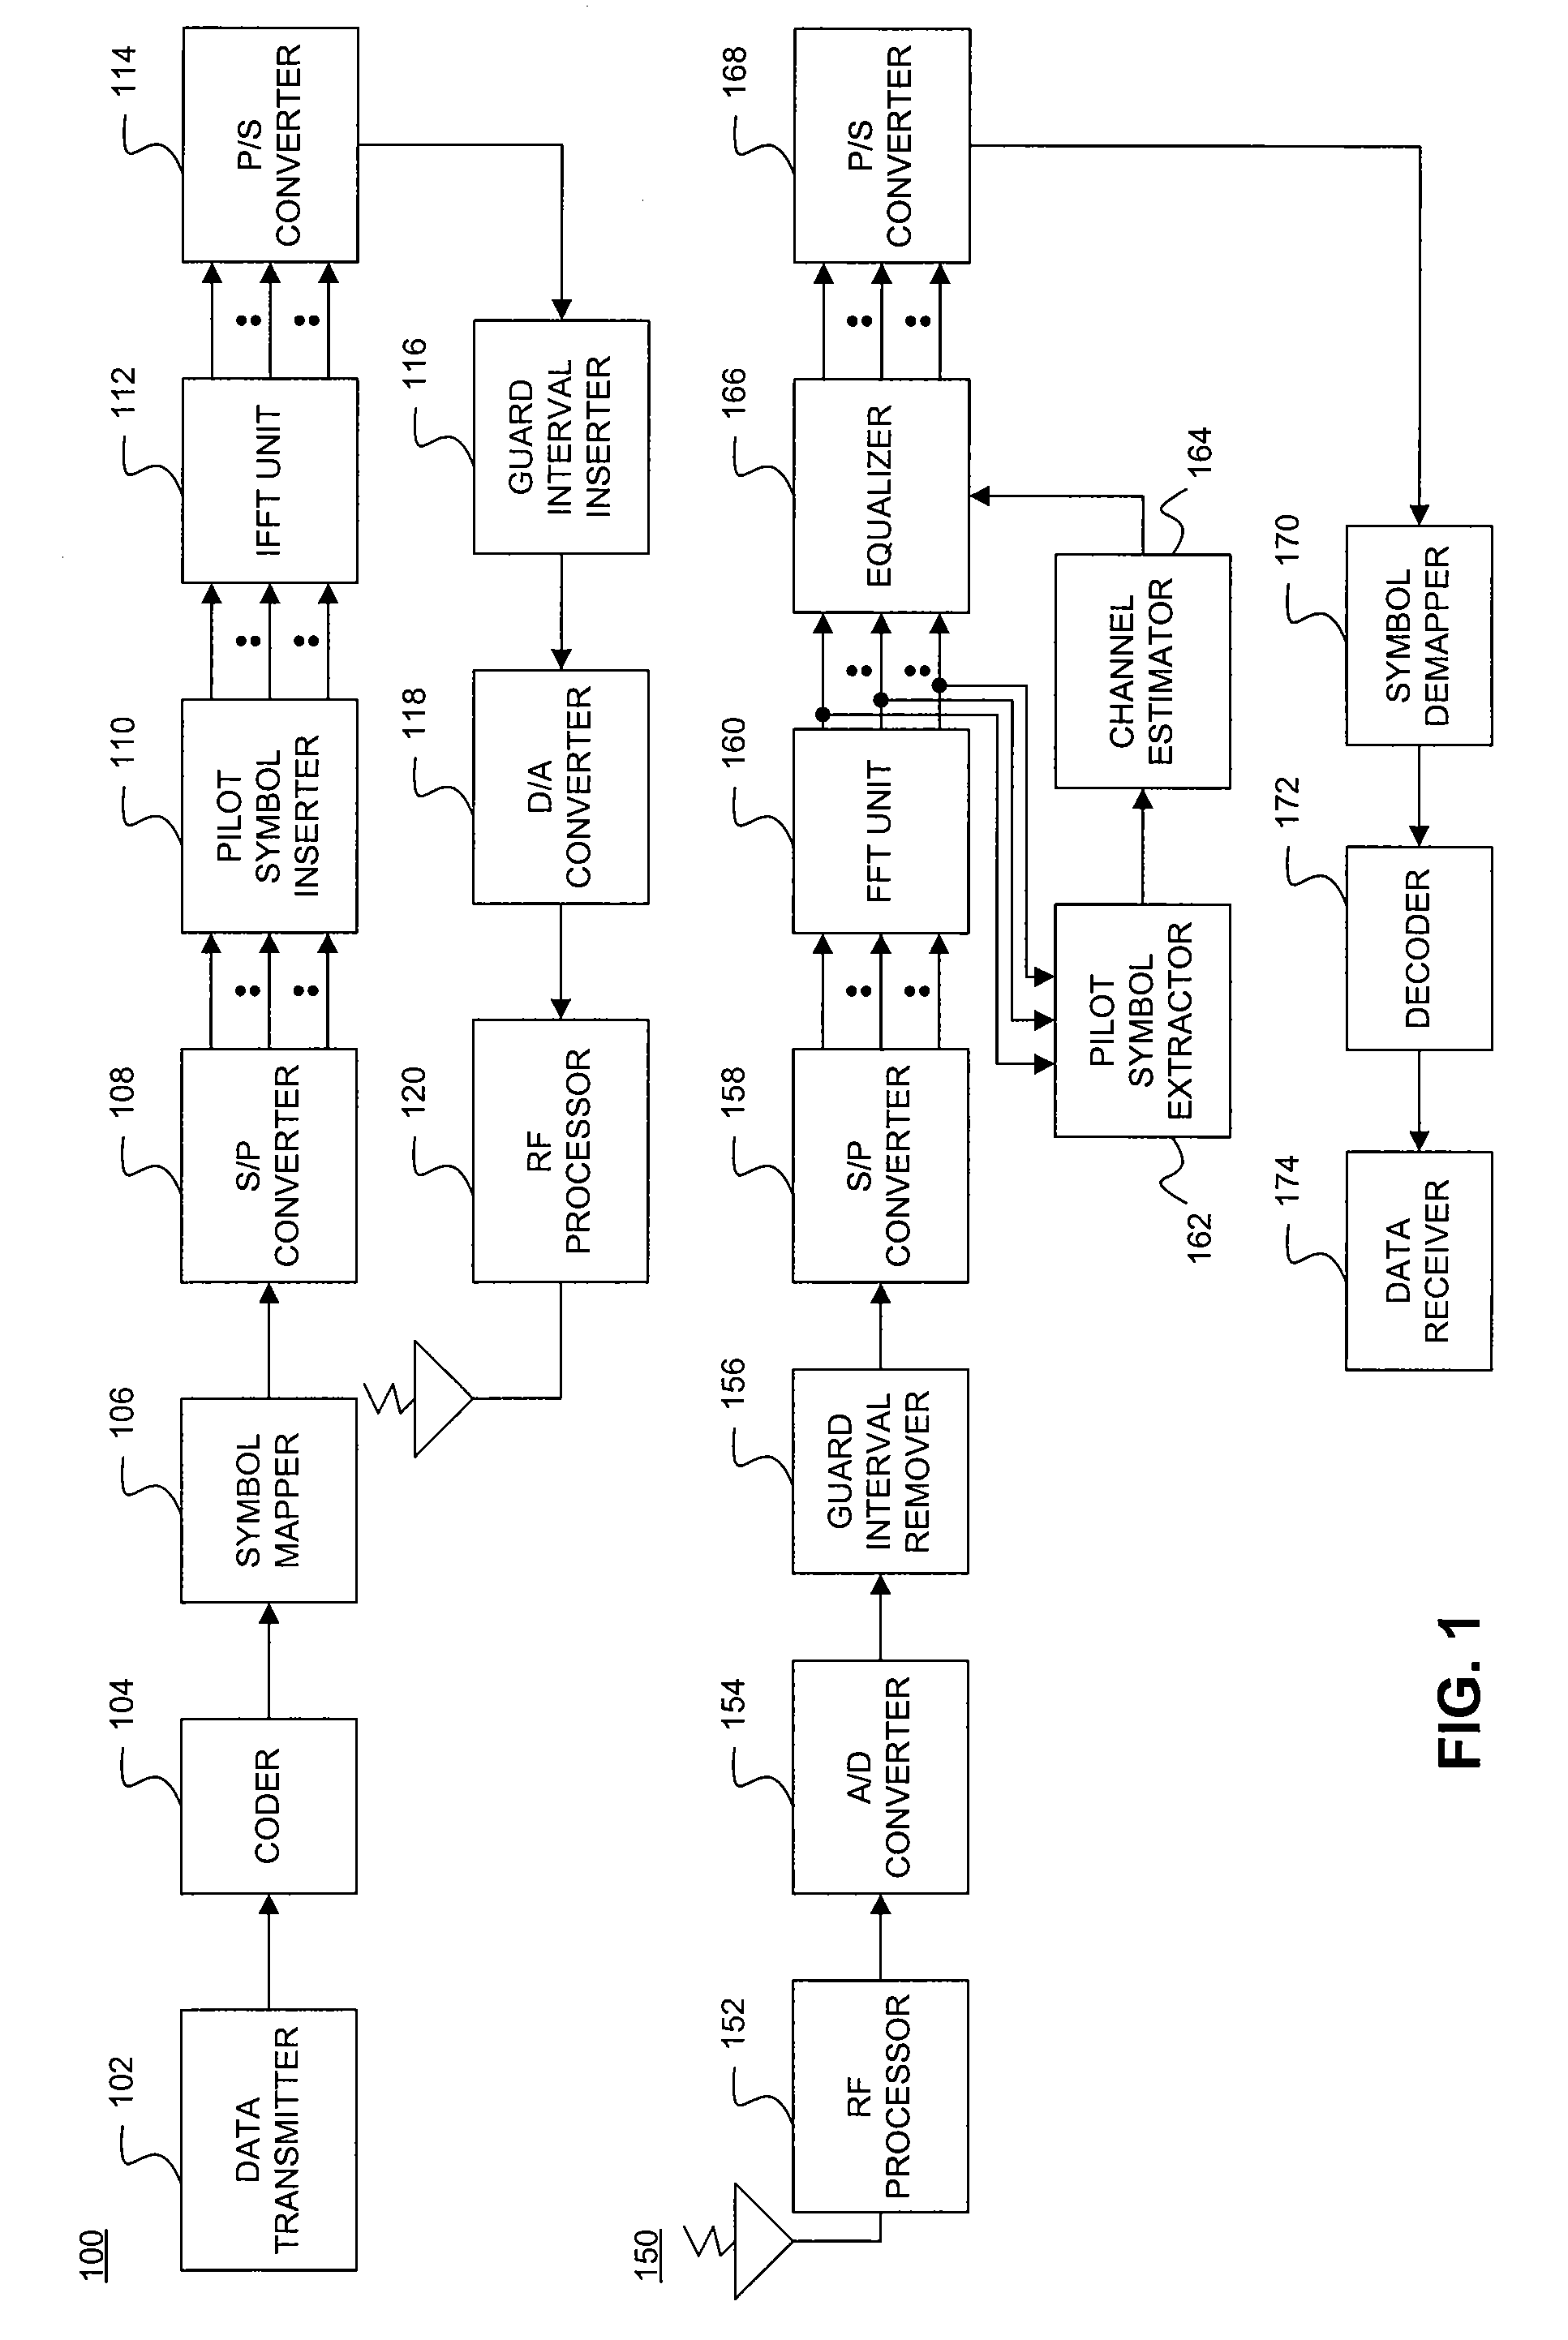 Method to Reduce Peak to Average Power Ratio in Multi-Carrier Modulation Receivers